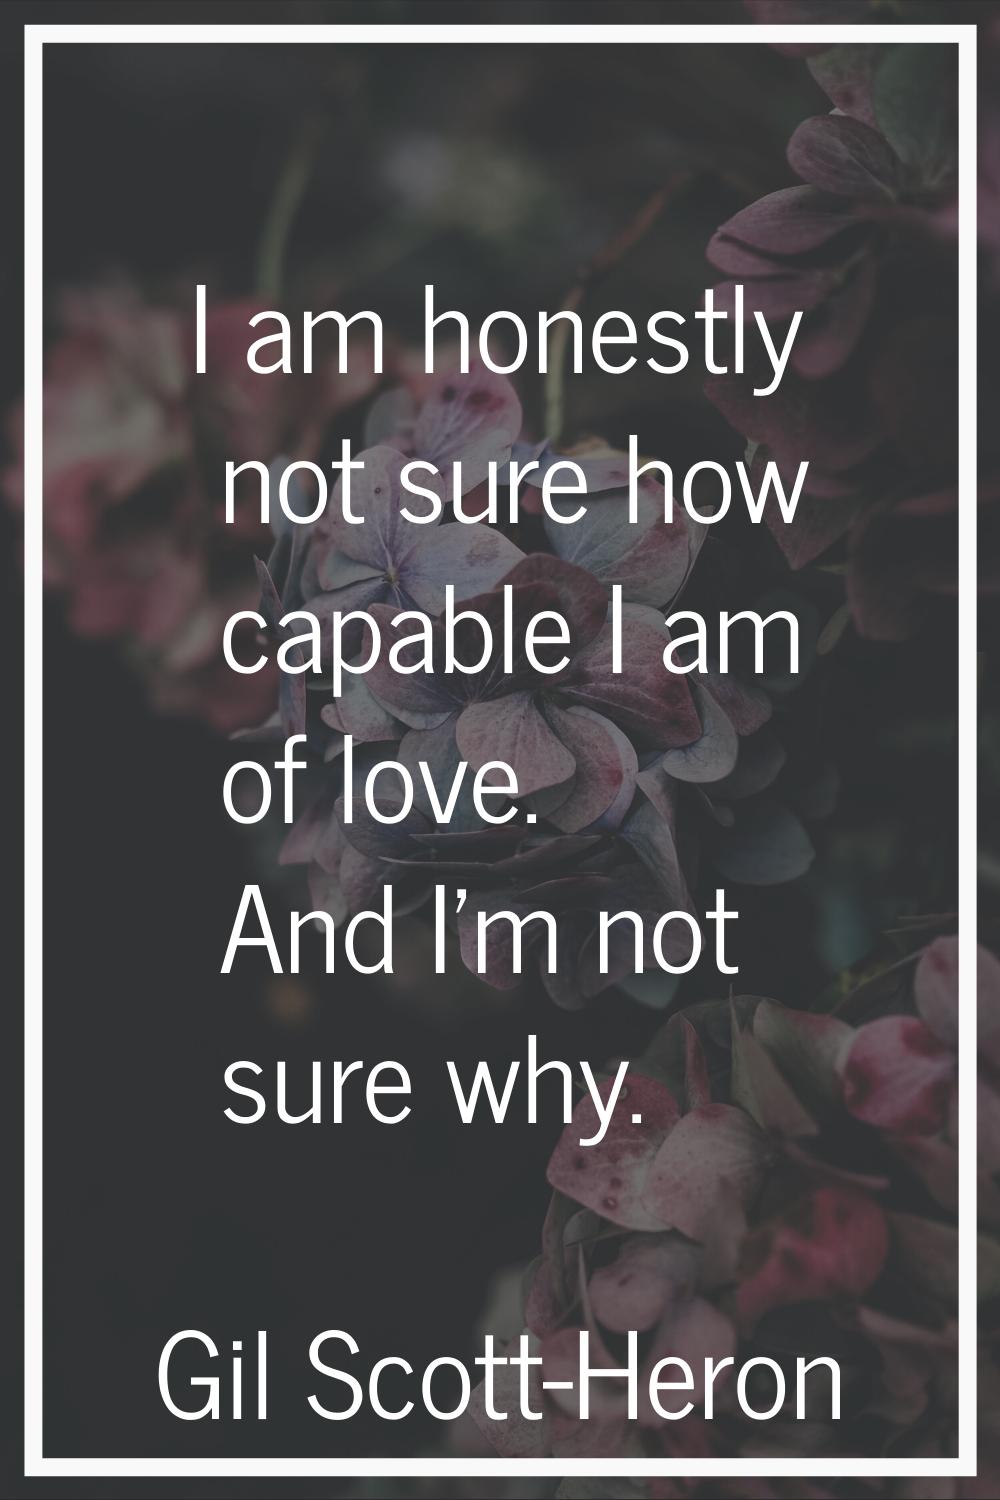 I am honestly not sure how capable I am of love. And I'm not sure why.